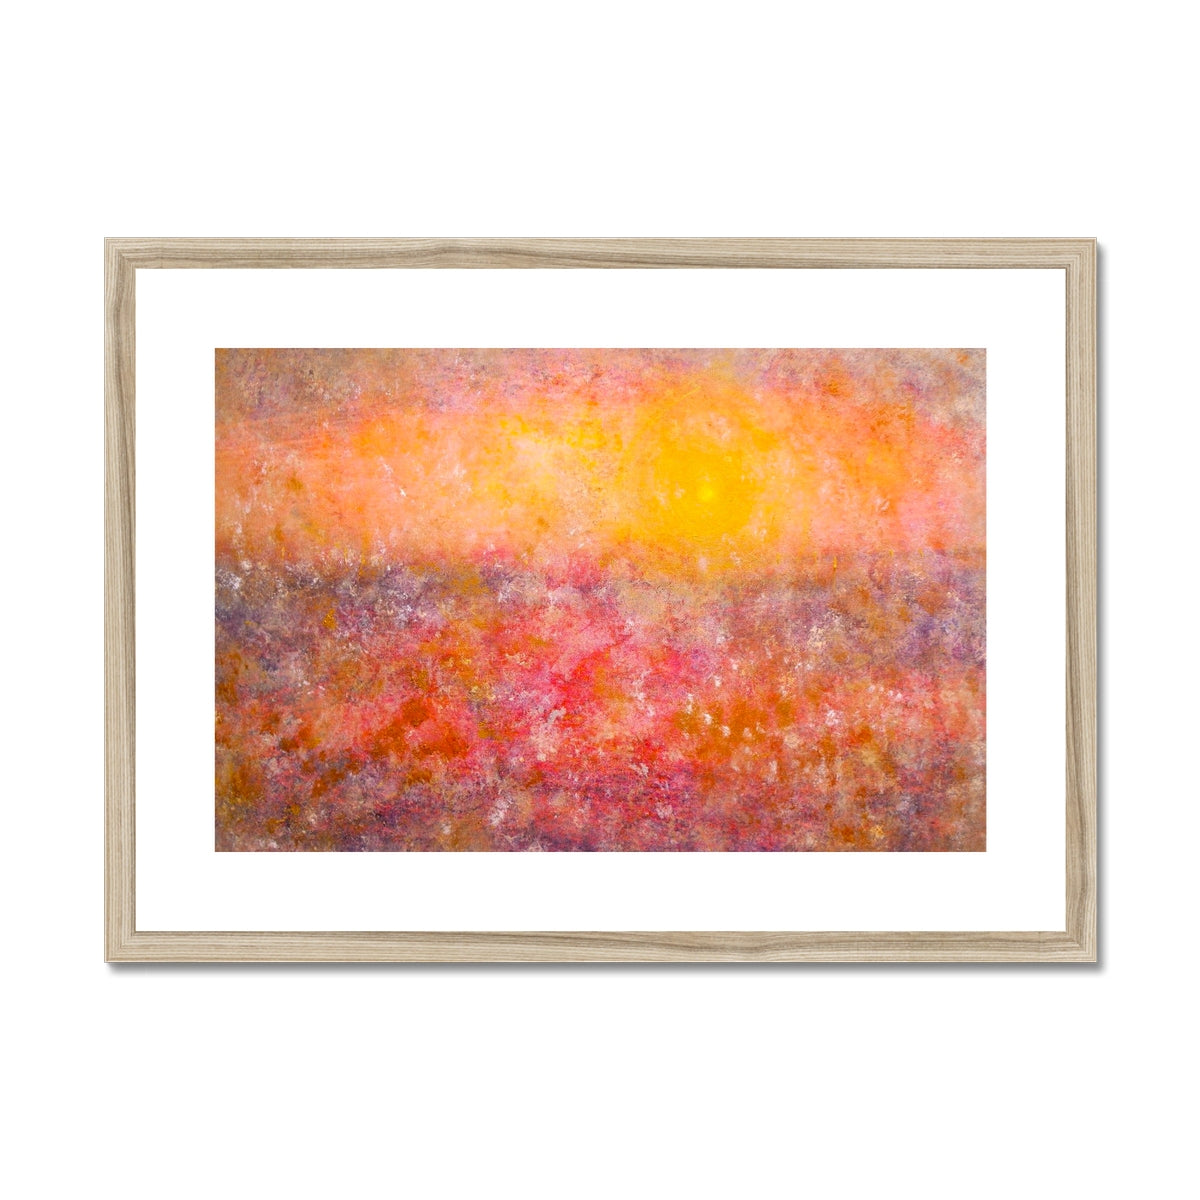 Sunrise Mist Horizon Abstract Painting | Framed & Mounted Prints From Scotland-Framed & Mounted Prints-Abstract & Impressionistic Art Gallery-A2 Landscape-Natural Frame-Paintings, Prints, Homeware, Art Gifts From Scotland By Scottish Artist Kevin Hunter